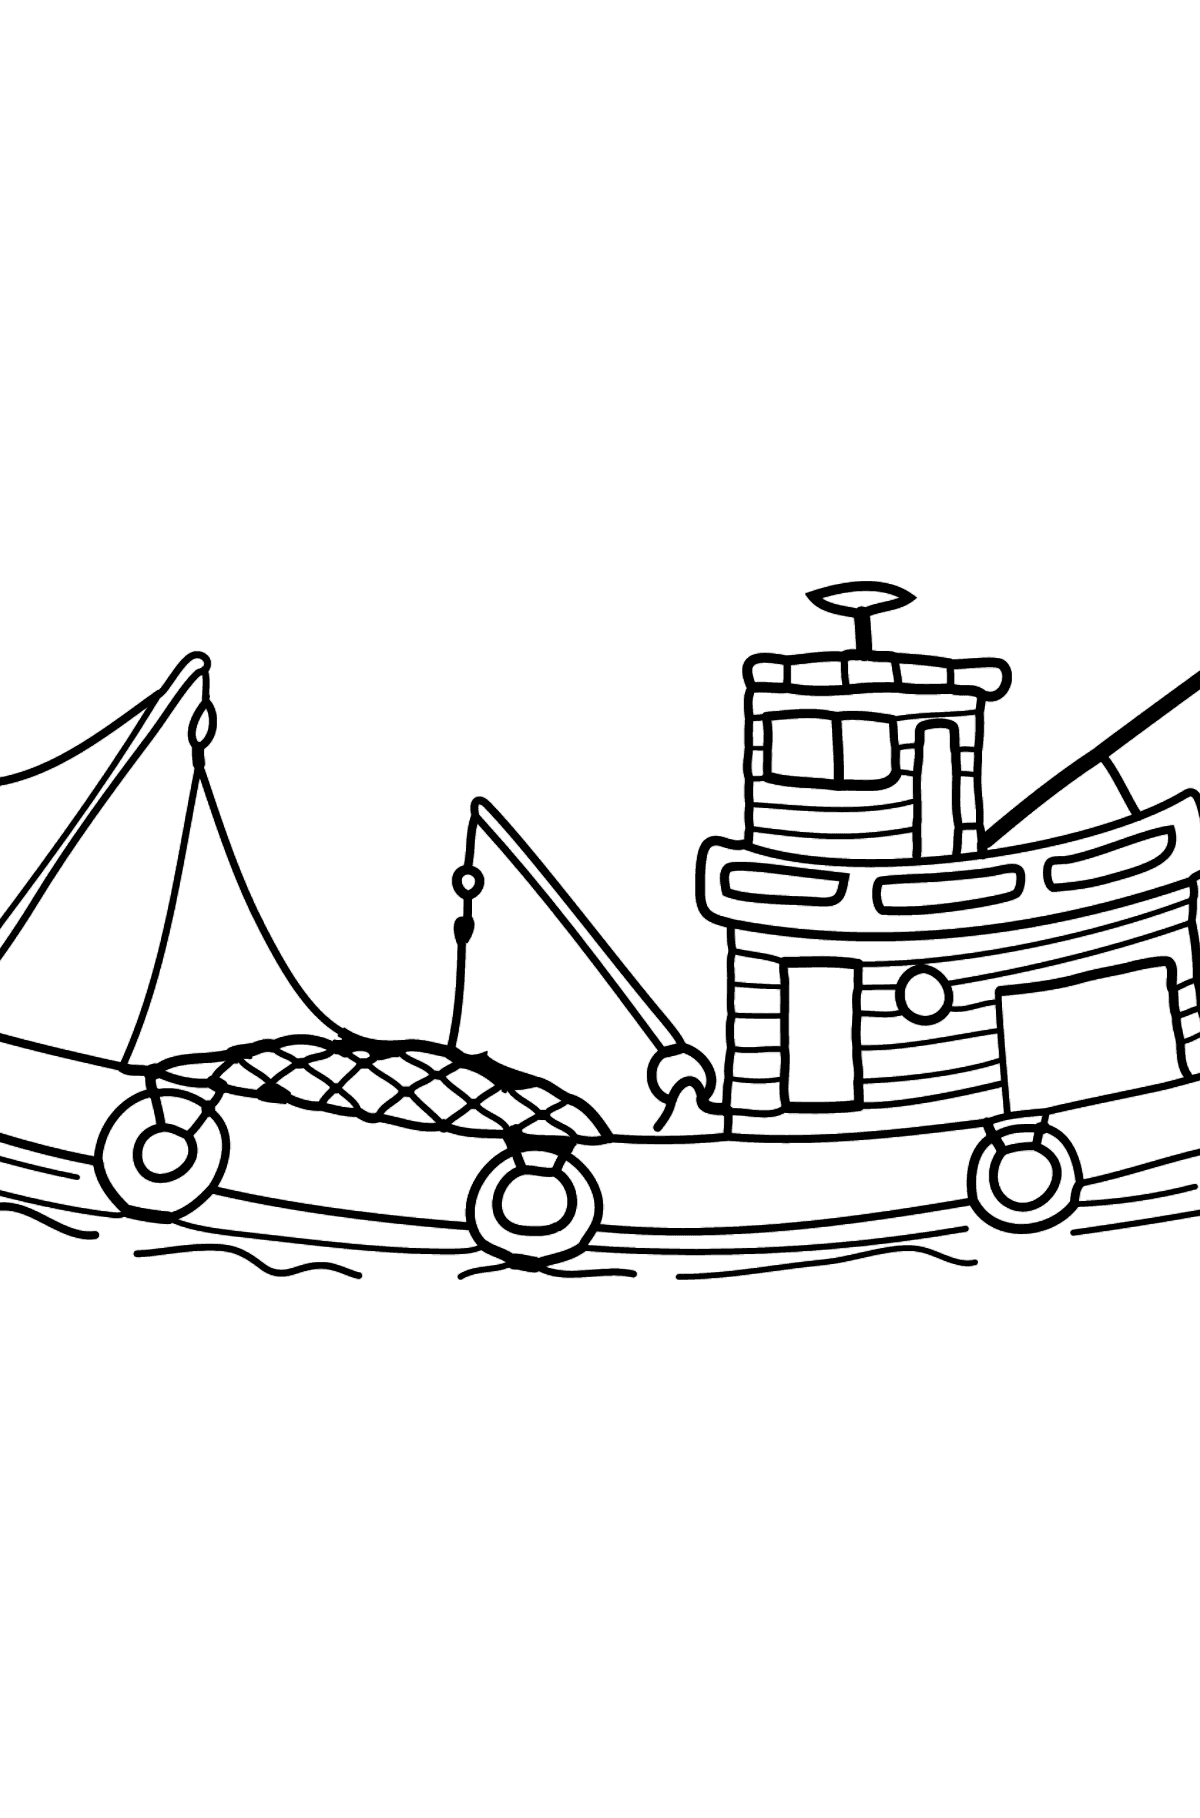 Coloring Page - A Fishing Boat - Coloring Pages for Kids